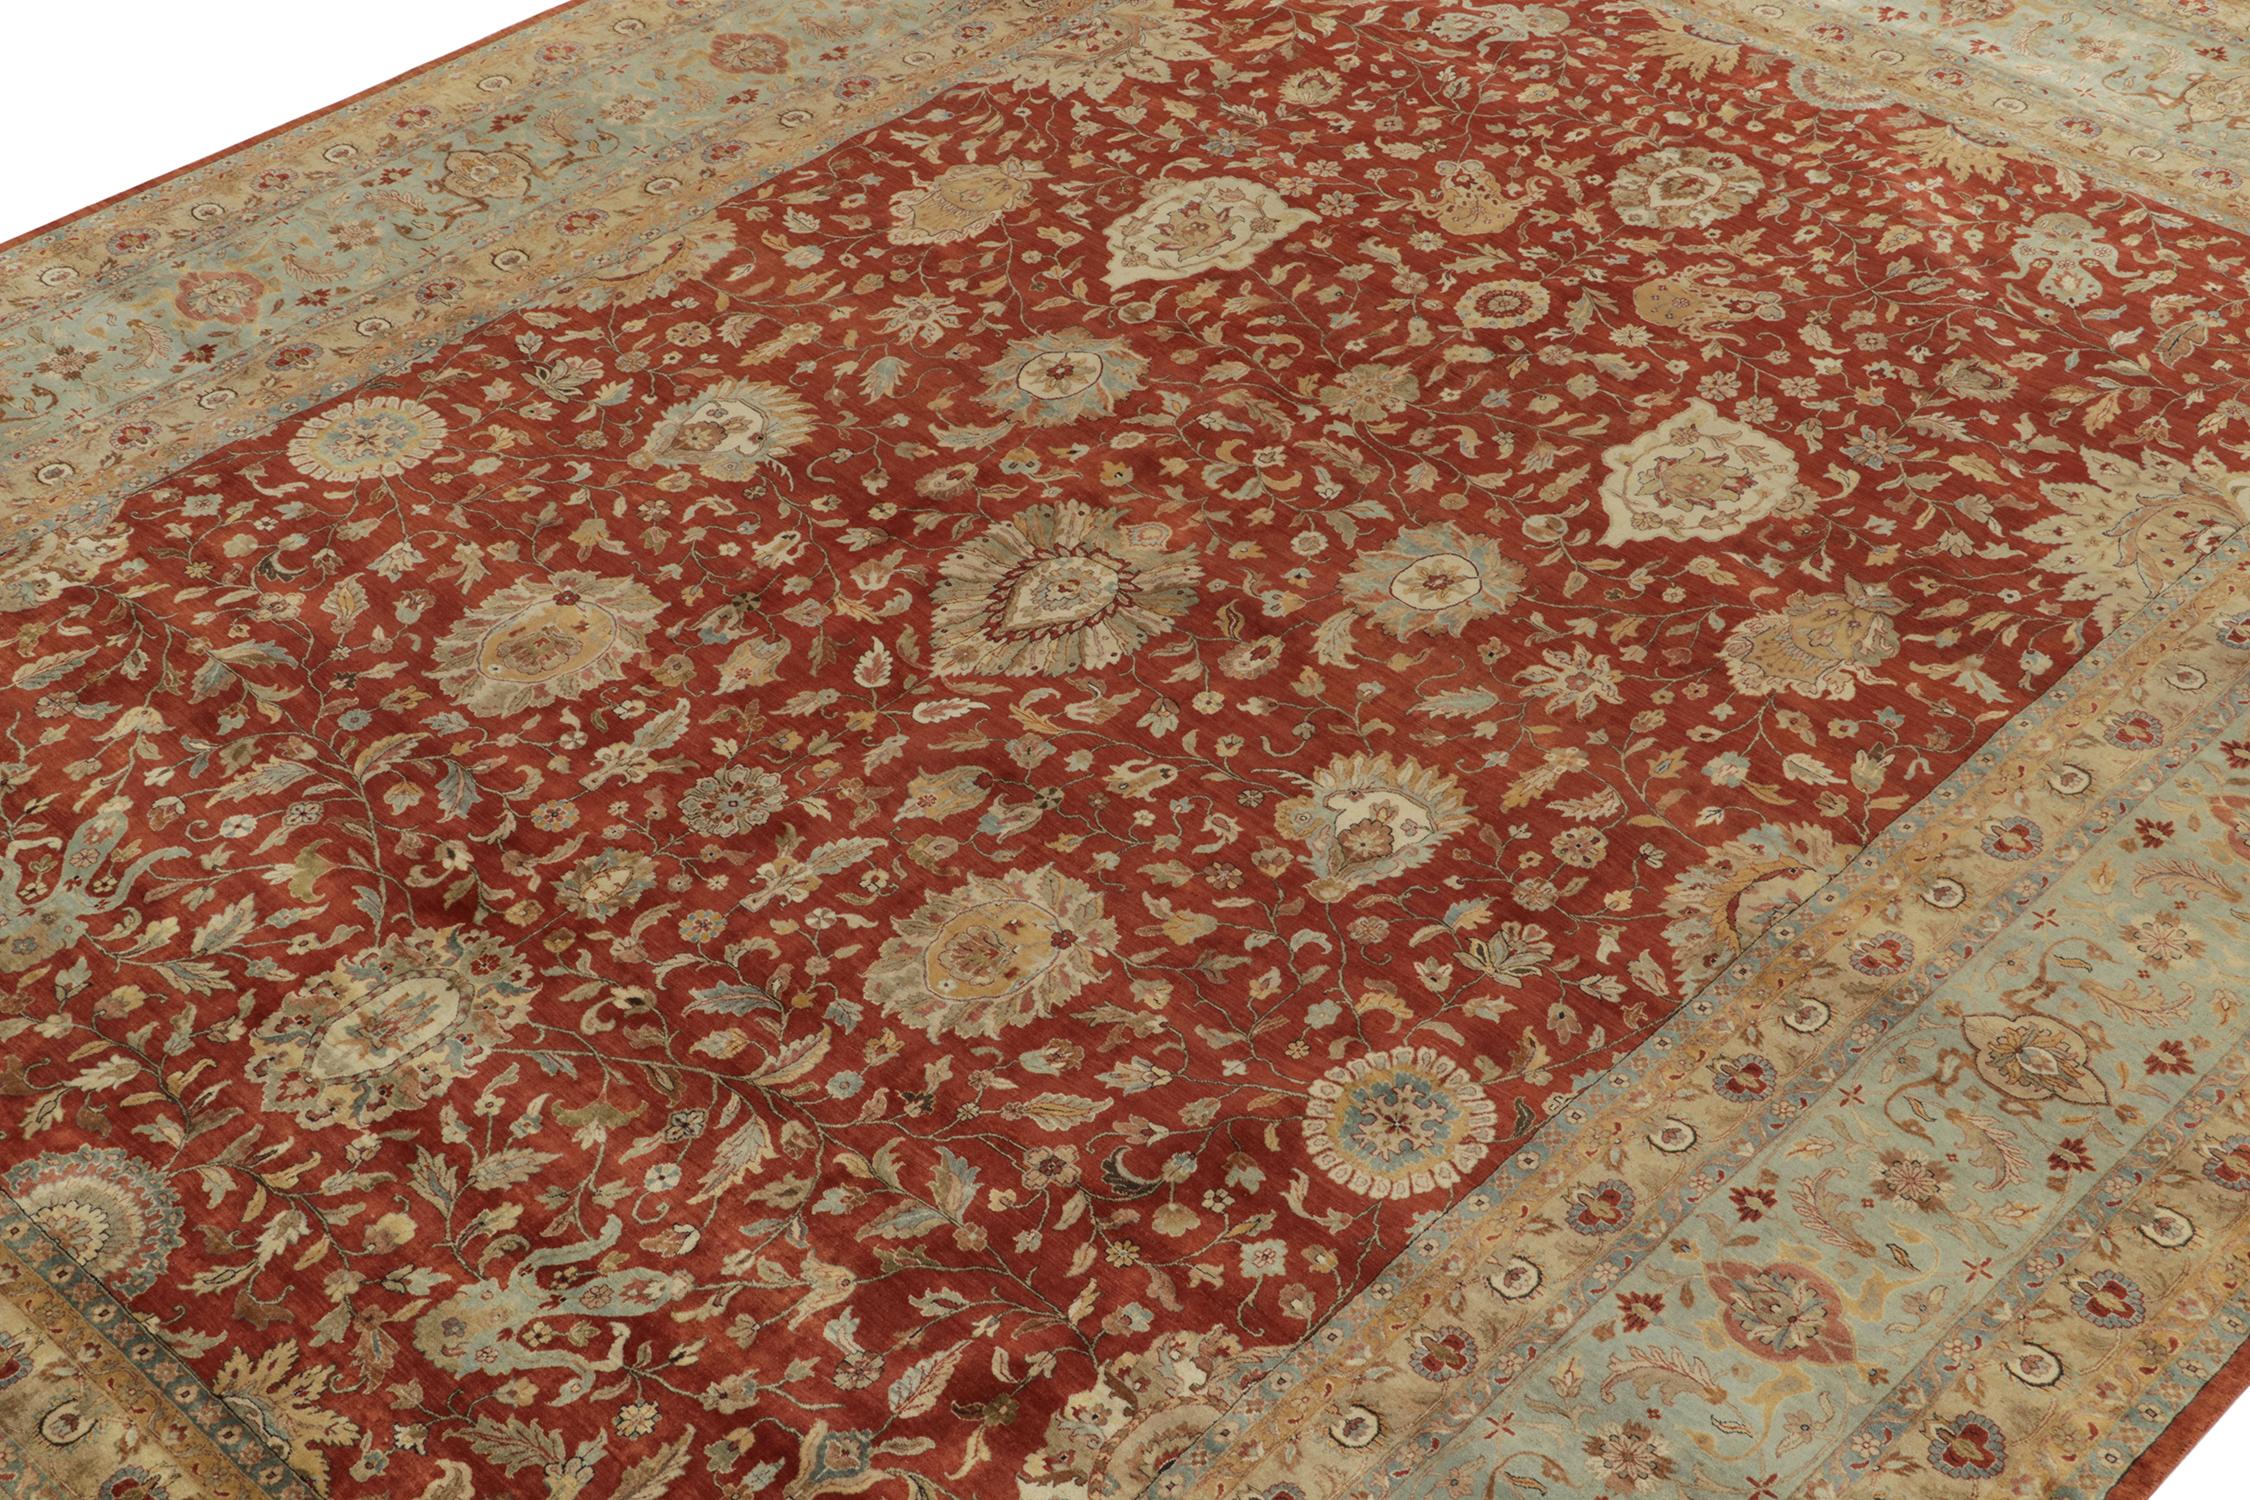 Hand-Knotted Rug & Kilim’s Classic Tabriz Style Rug with Beige & Blue Florals on Rust Red For Sale